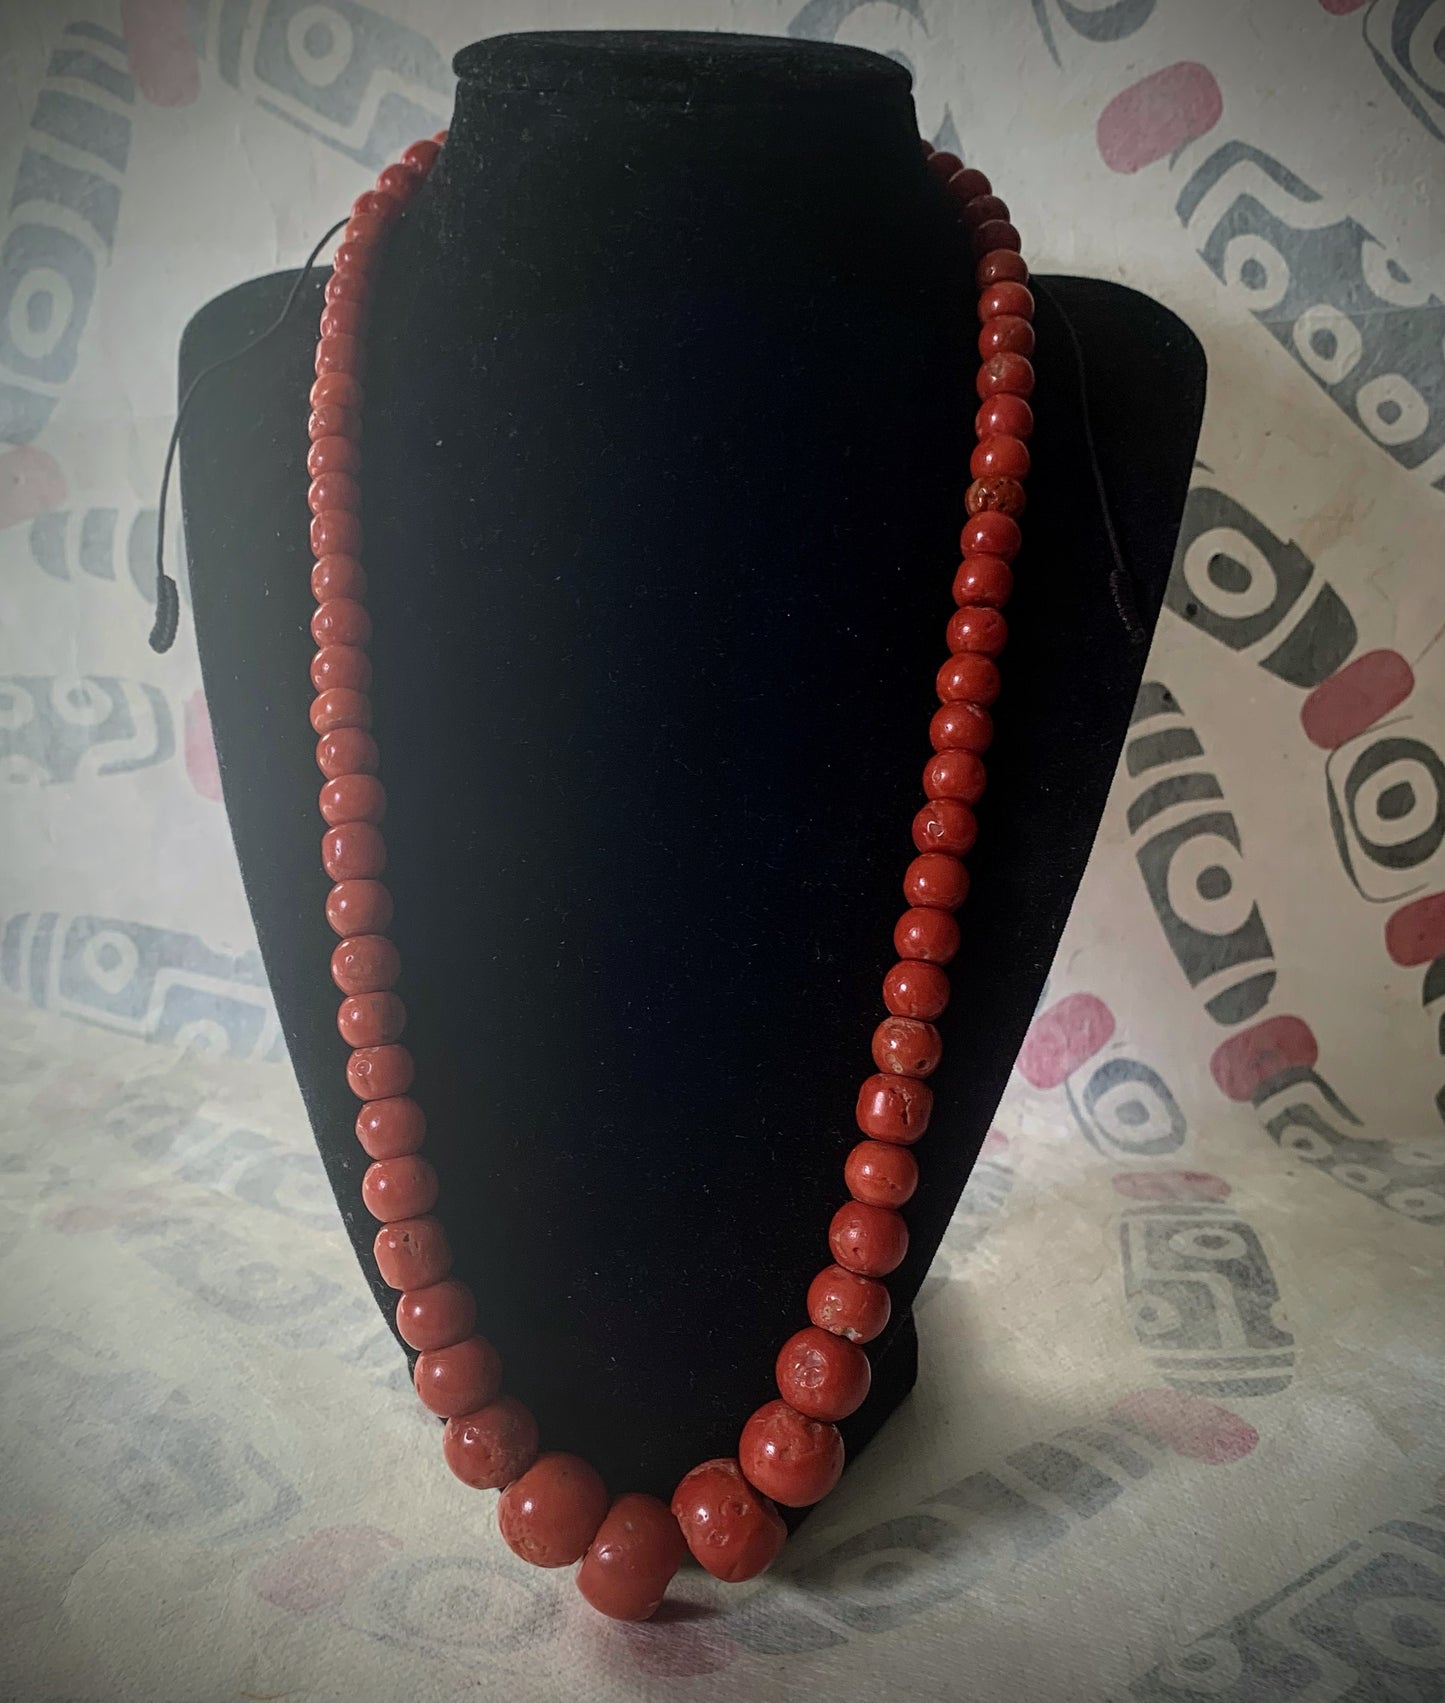 A necklace with antique coral beads